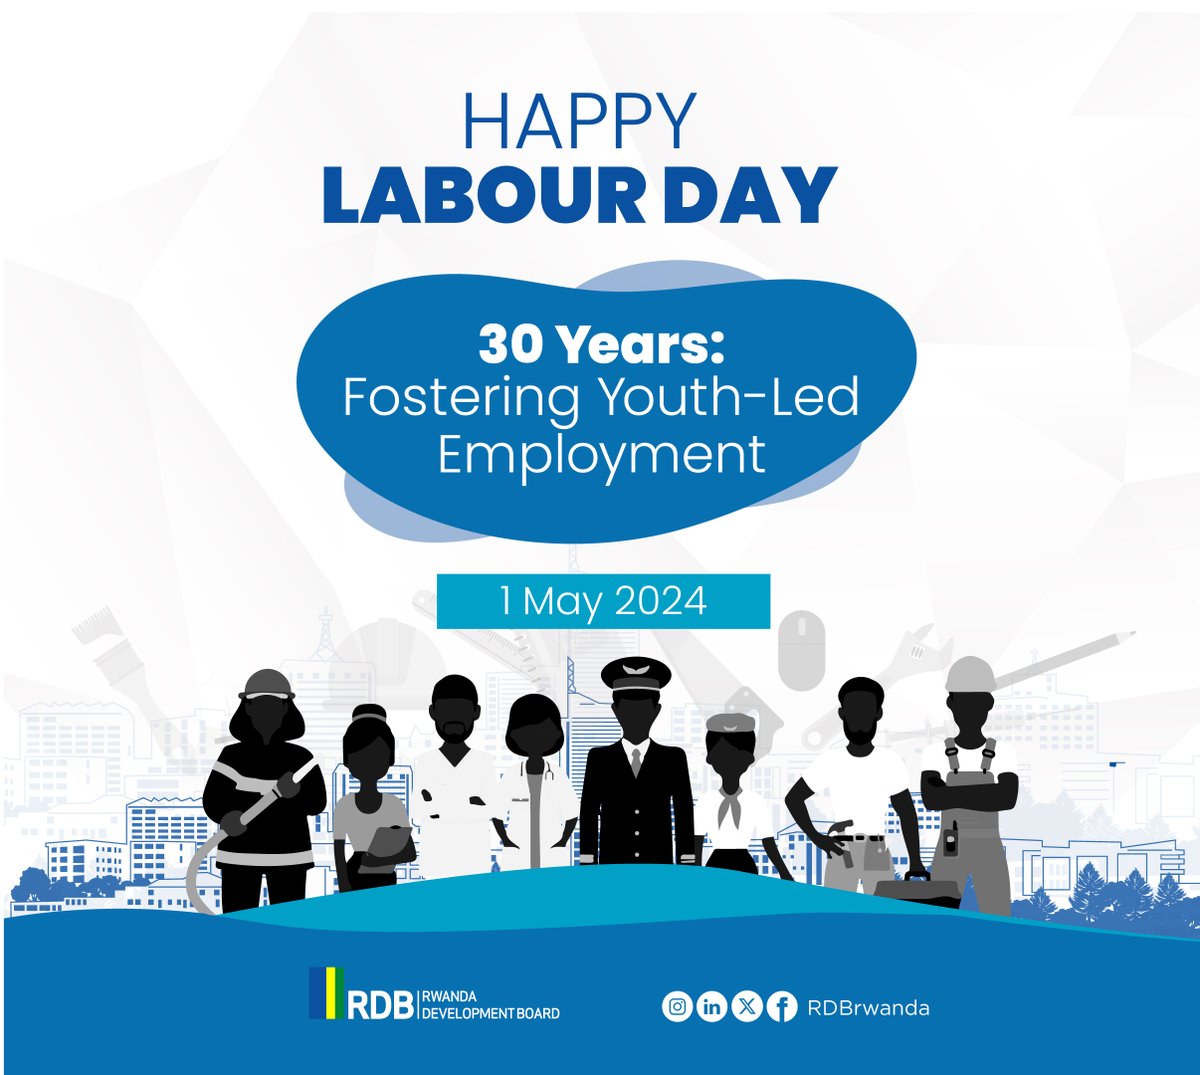 Happy Labour Day! Today, RDB honours all the workers who continue to contribute to Rwanda's economic transformation. #LabourDay2024